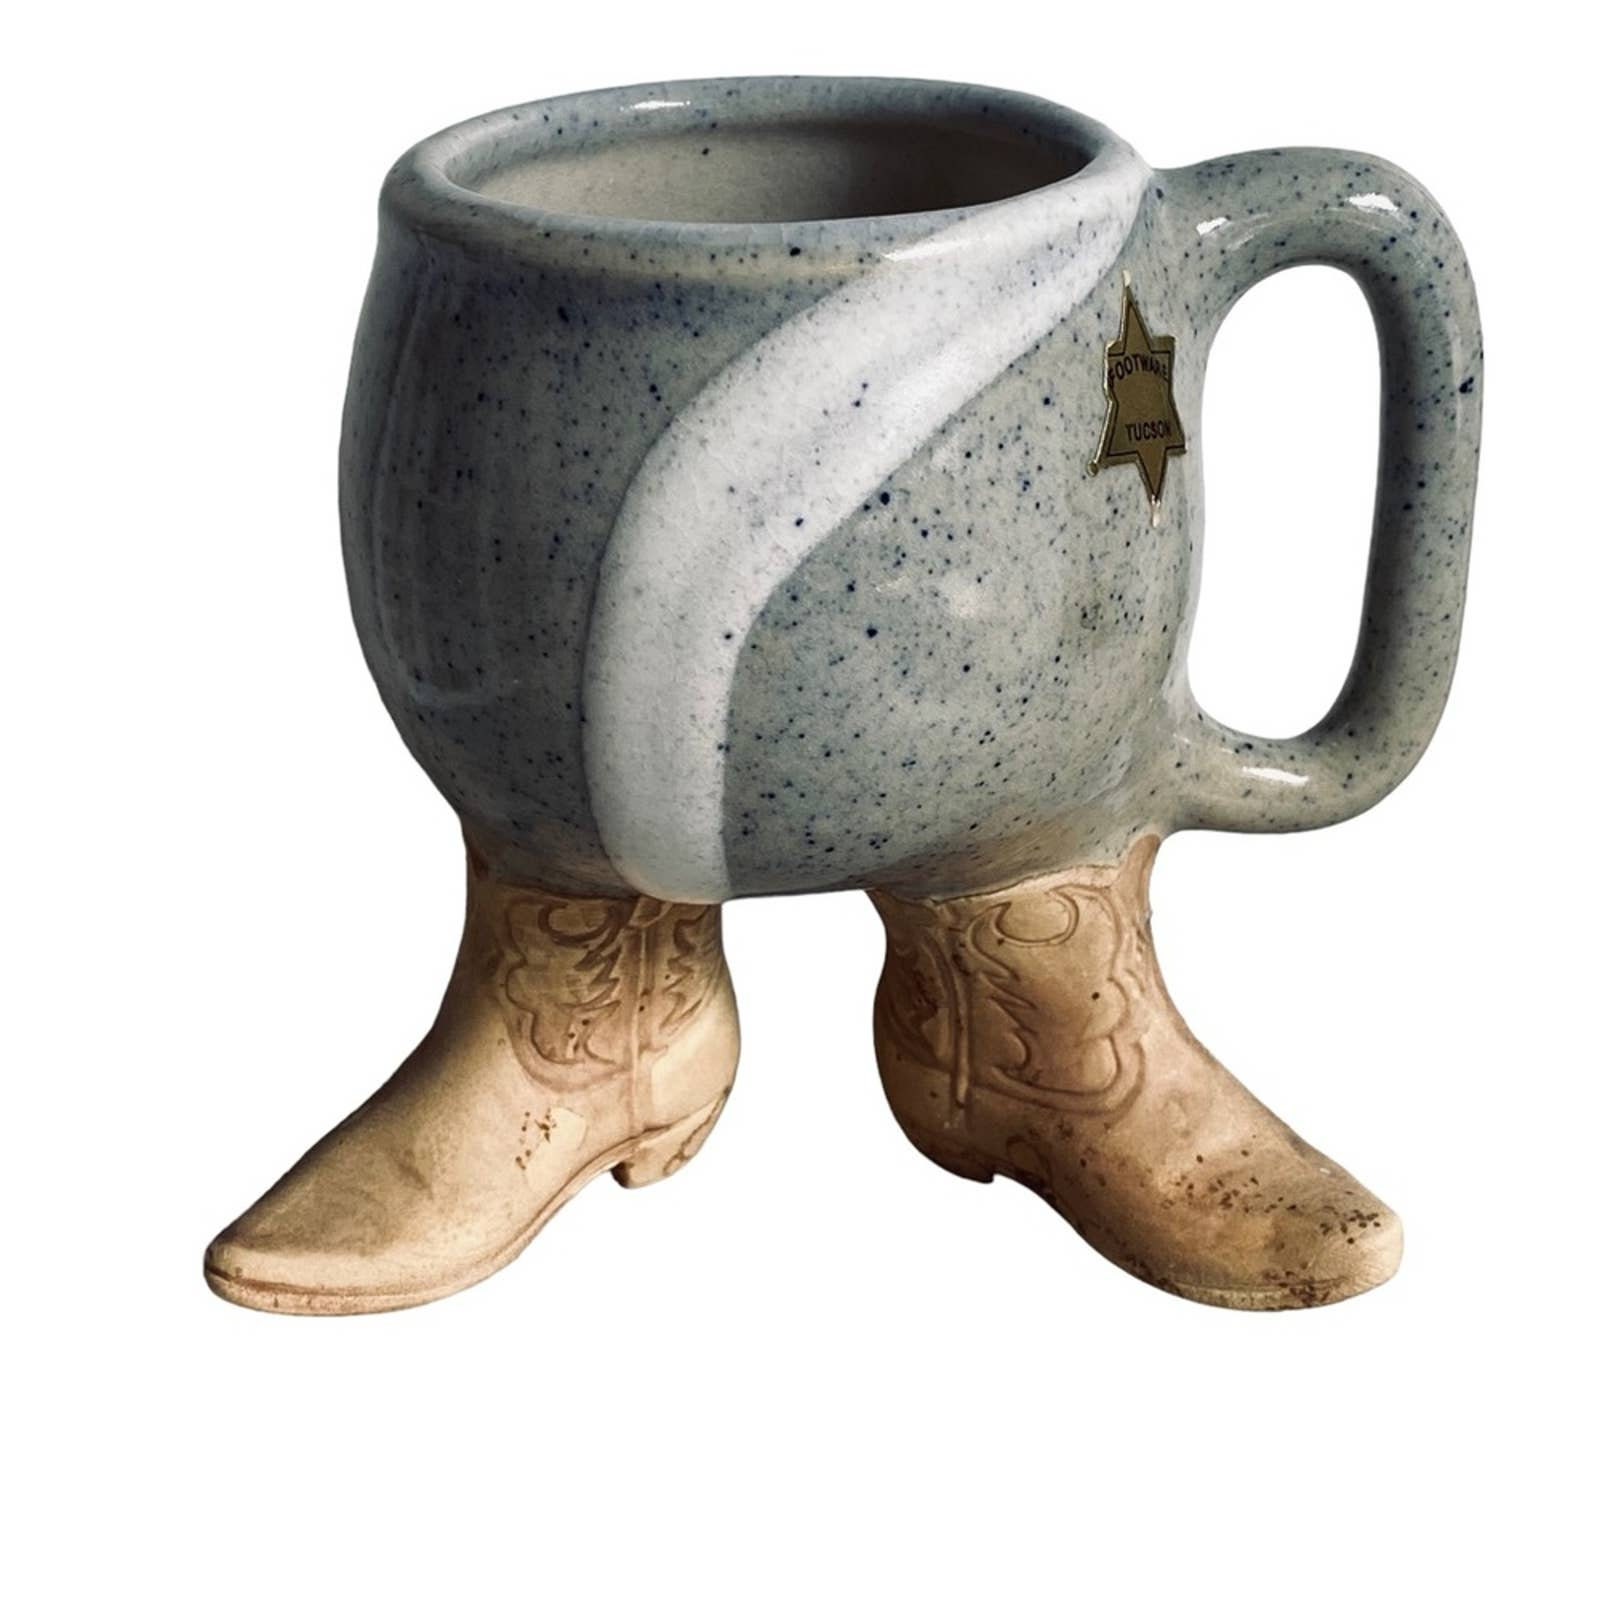 Boots & Saddle Coffee Cup 8 oz